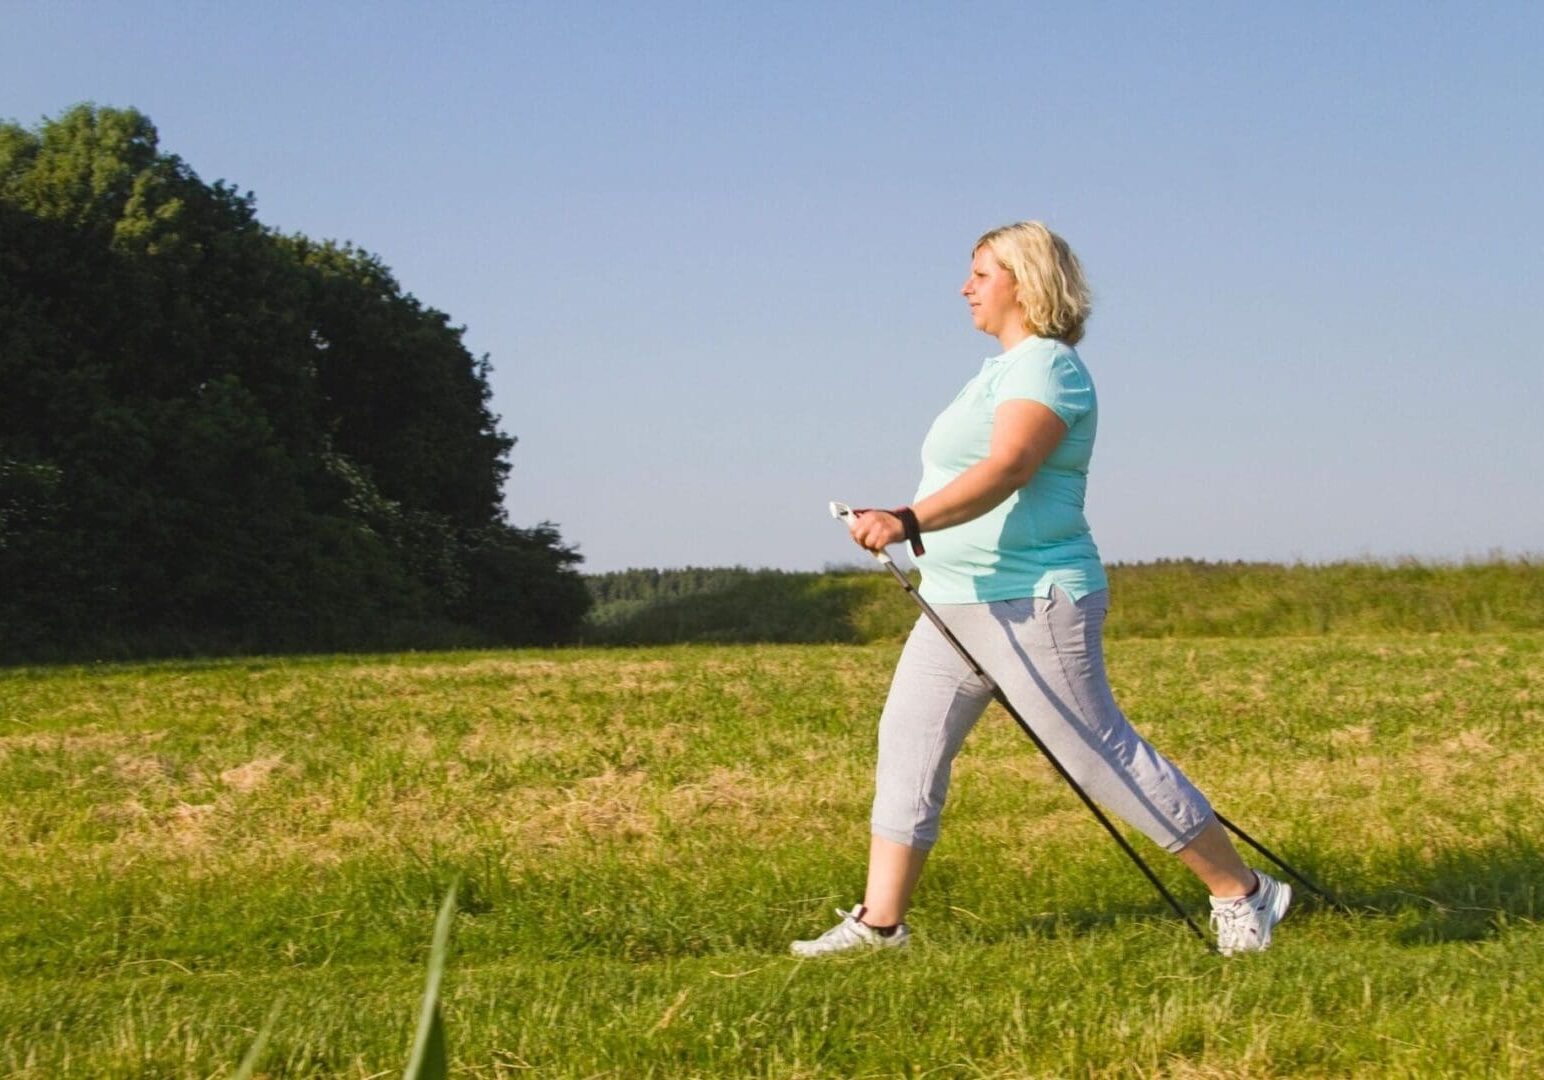 A woman learning about online education while walking in a field using nordic walking poles on a sunny day.